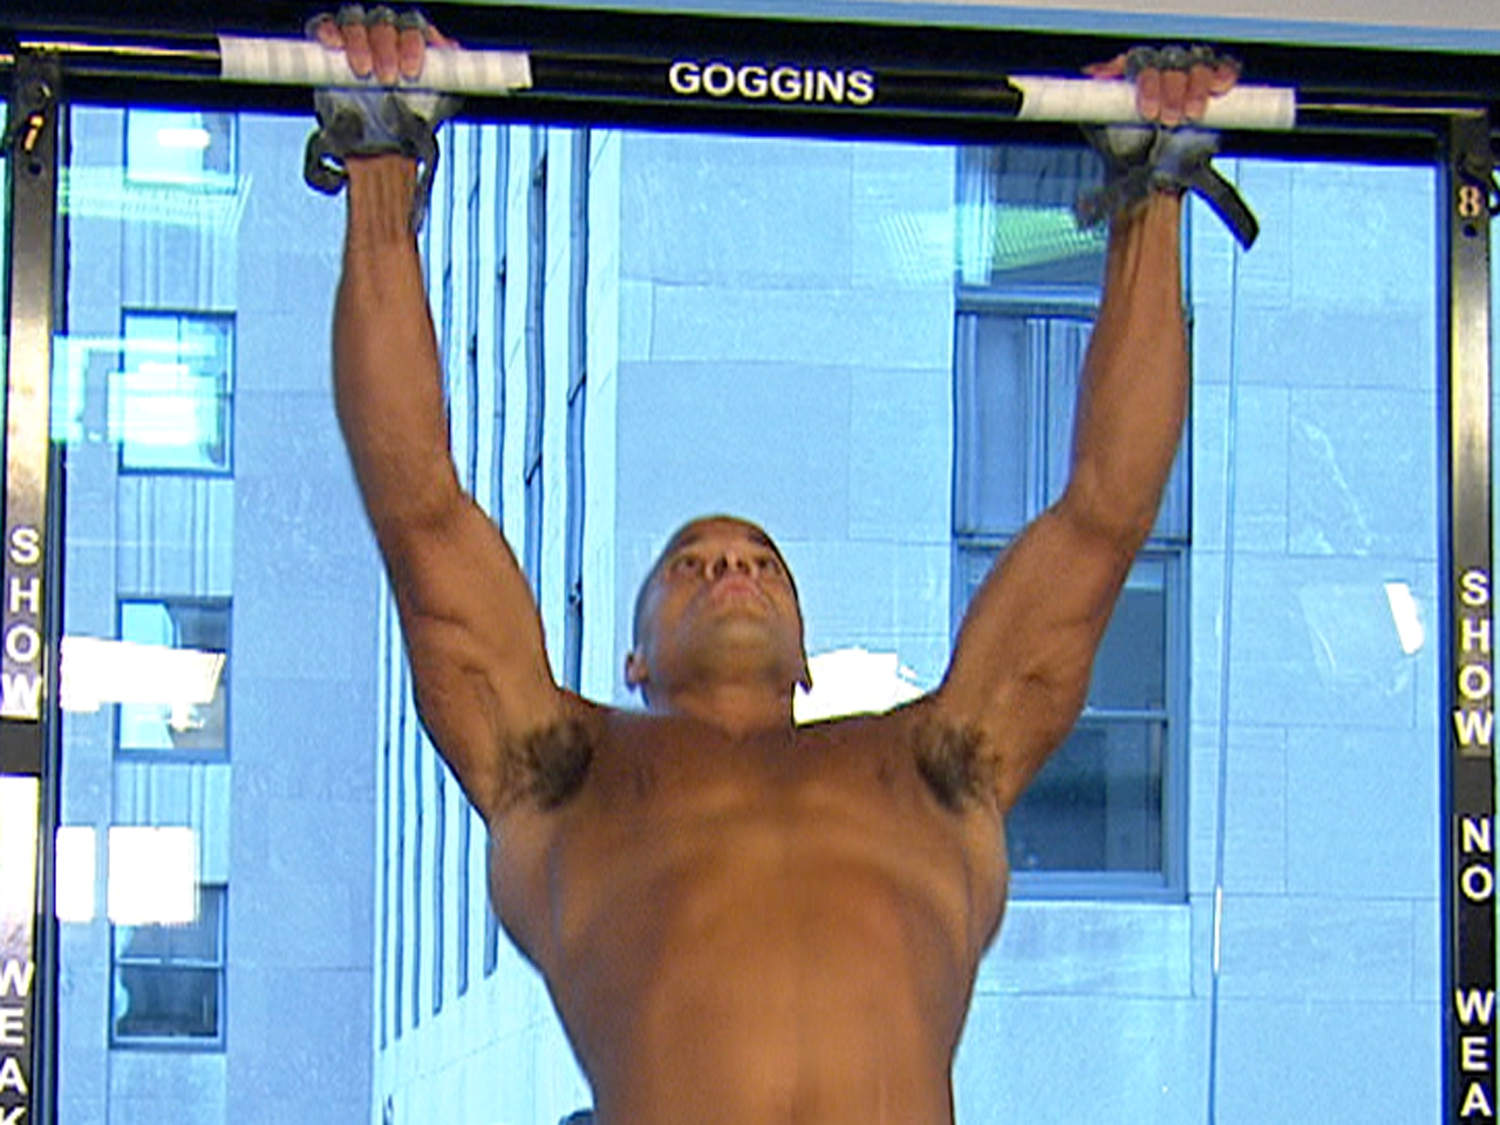 Meet the man doing 24 hours of pull-ups for charity